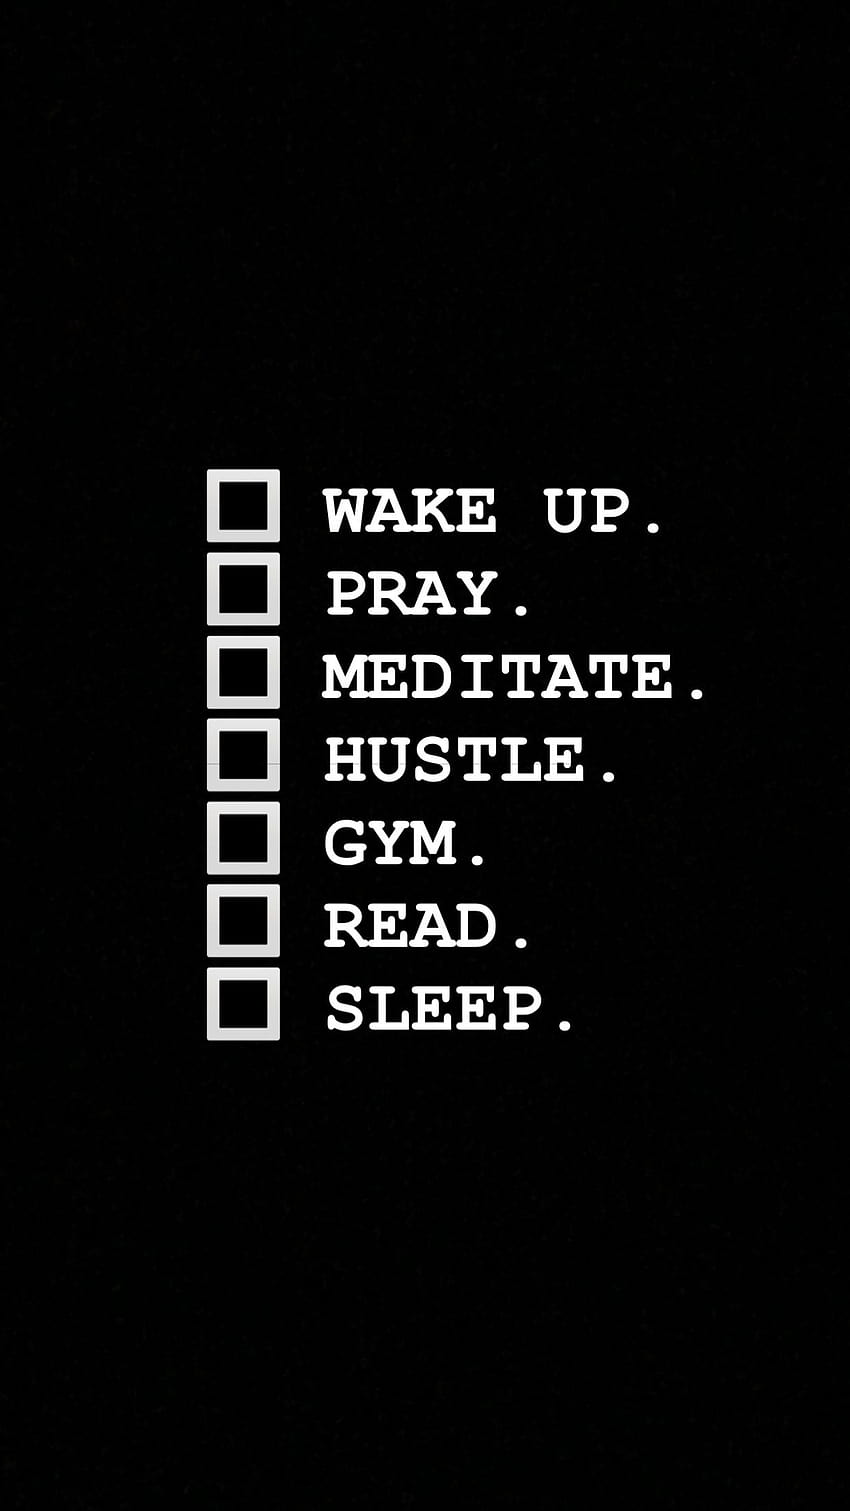 Daily Routine, daily habits HD phone wallpaper